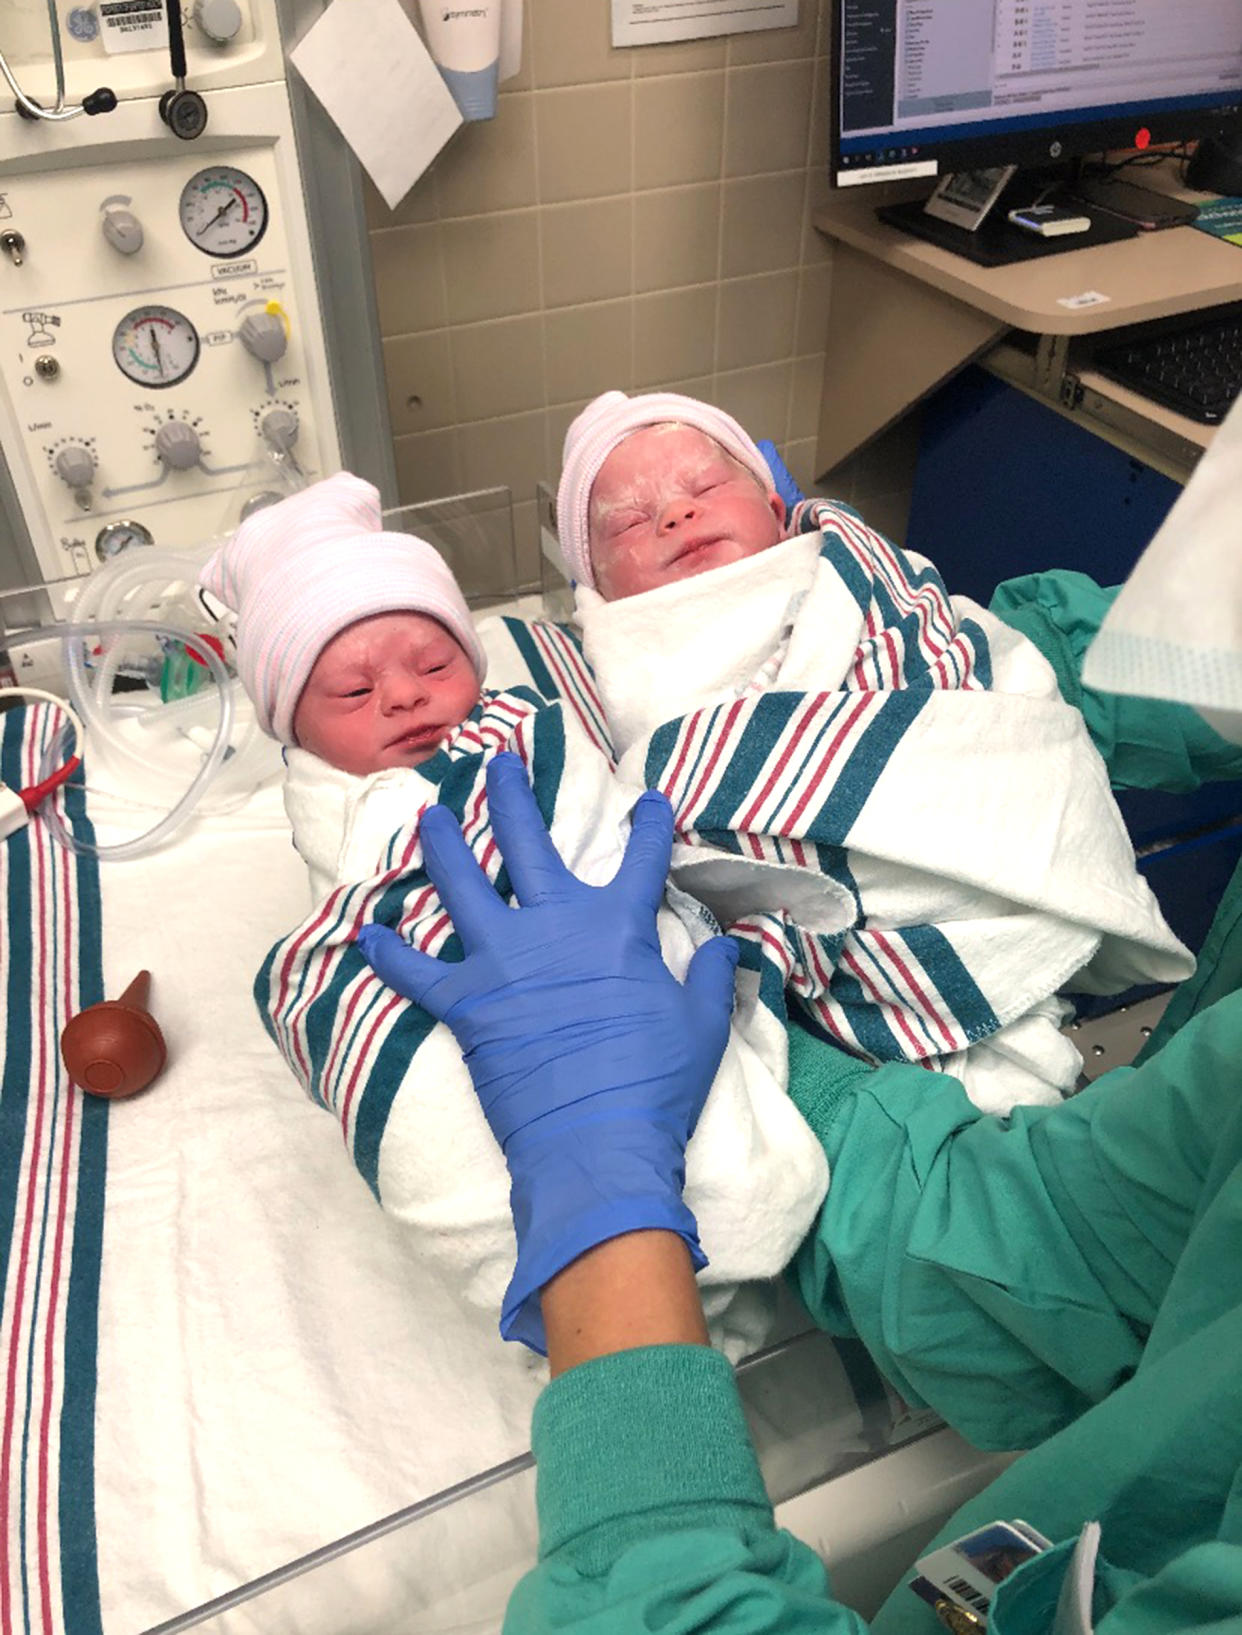 Medical experts say the chances of both twins being born with Down syndrome are exceedingly rare. (Courtesy Savannah Combs)